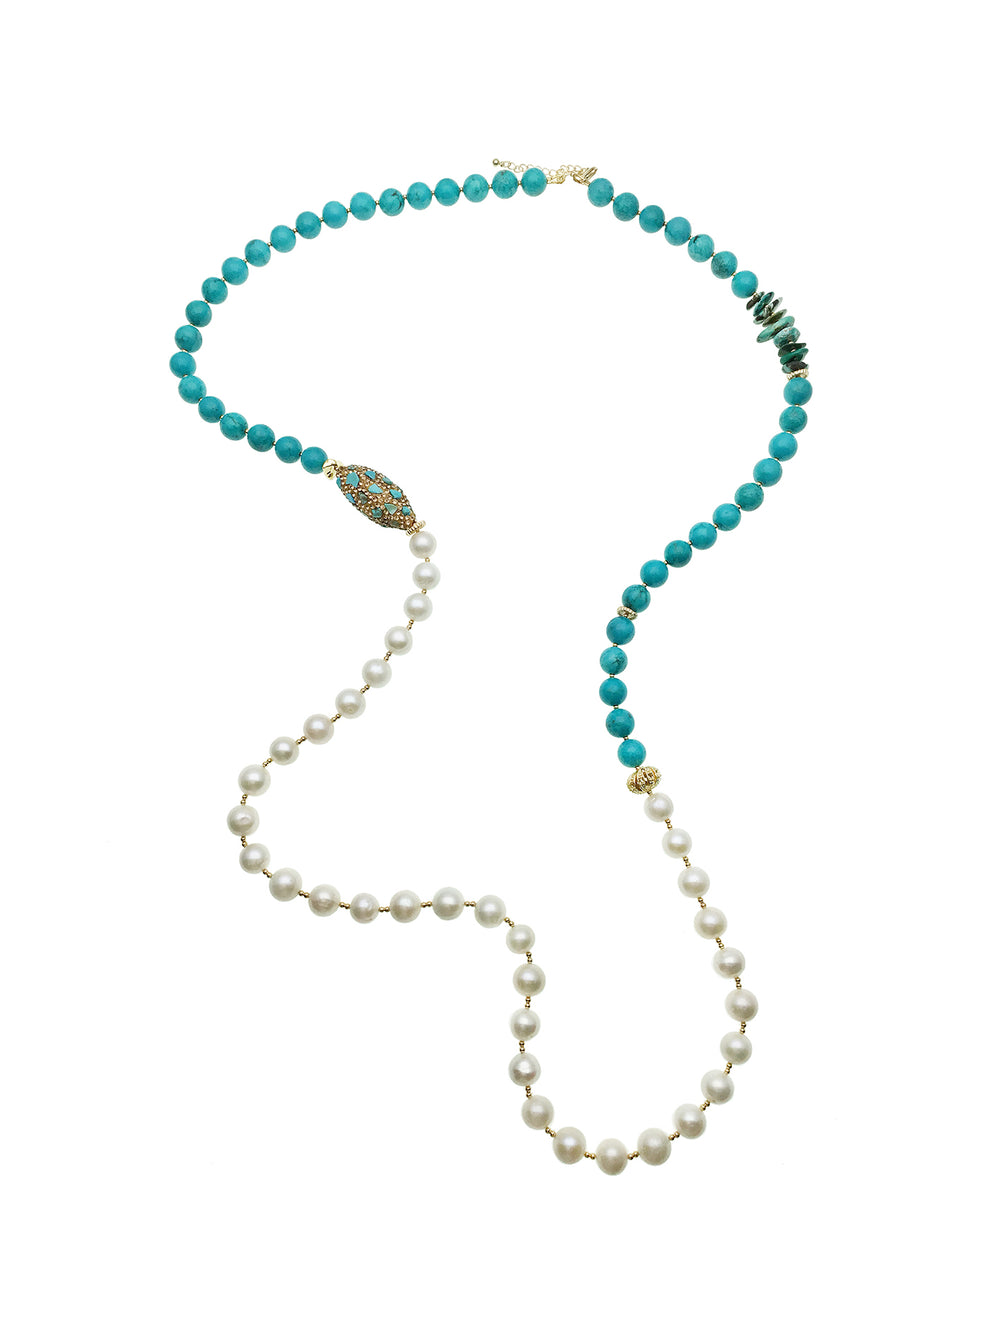 Freshwater Pearls & Turquoise Multi-Way Necklace CN020 - FARRA